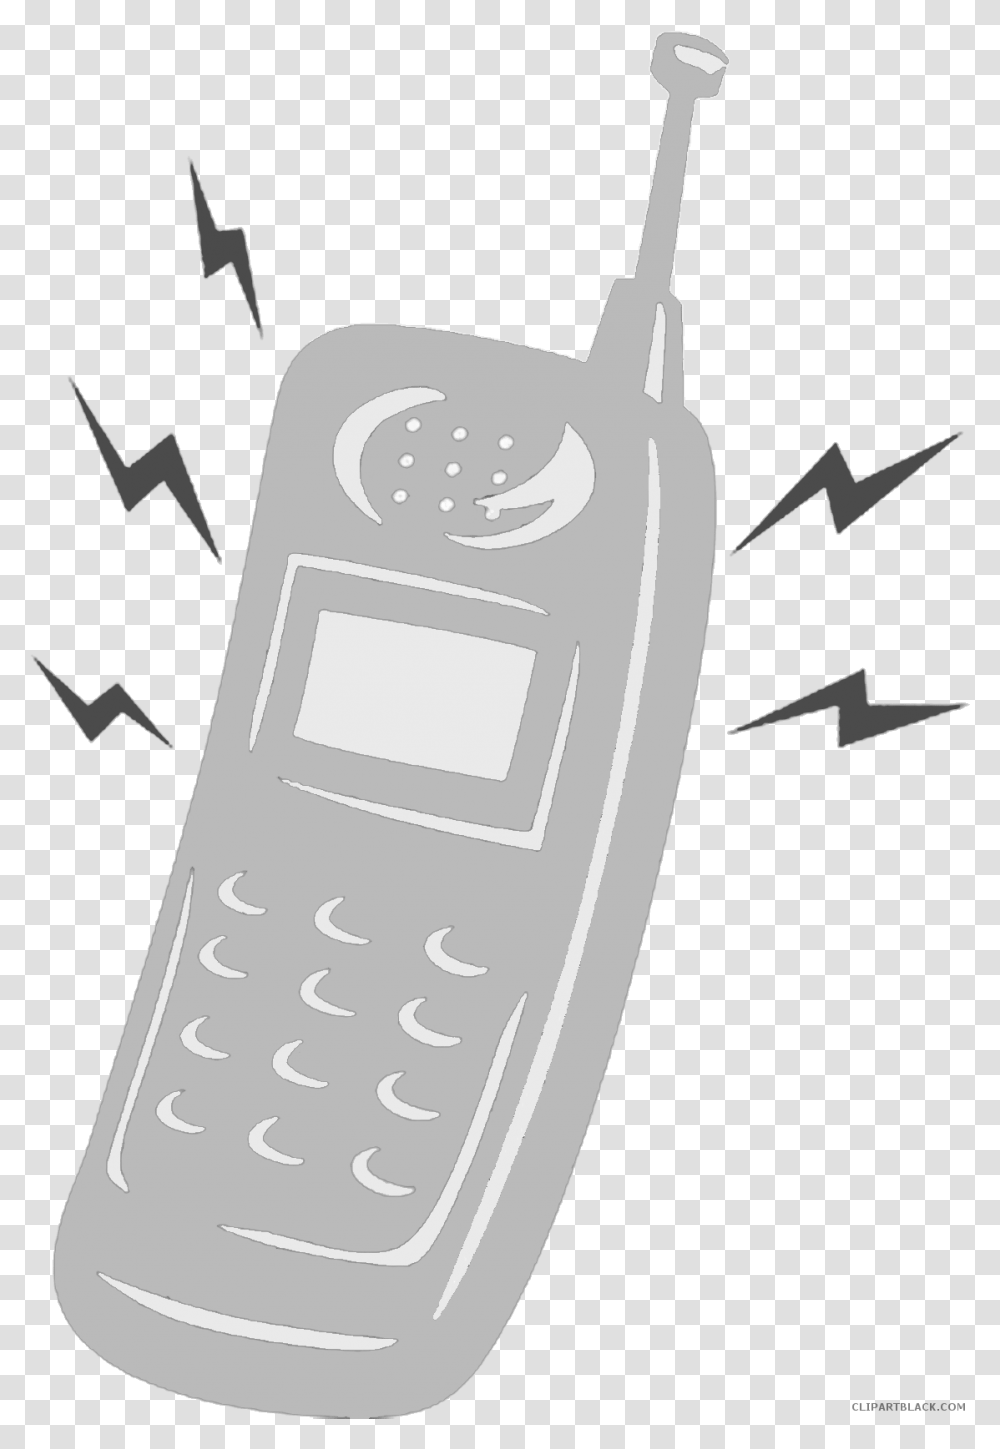 Svg Royalty Free Clipartblack Com Tools Cell Phone Ringing, Electronics, Mobile Phone, Iphone Transparent Png